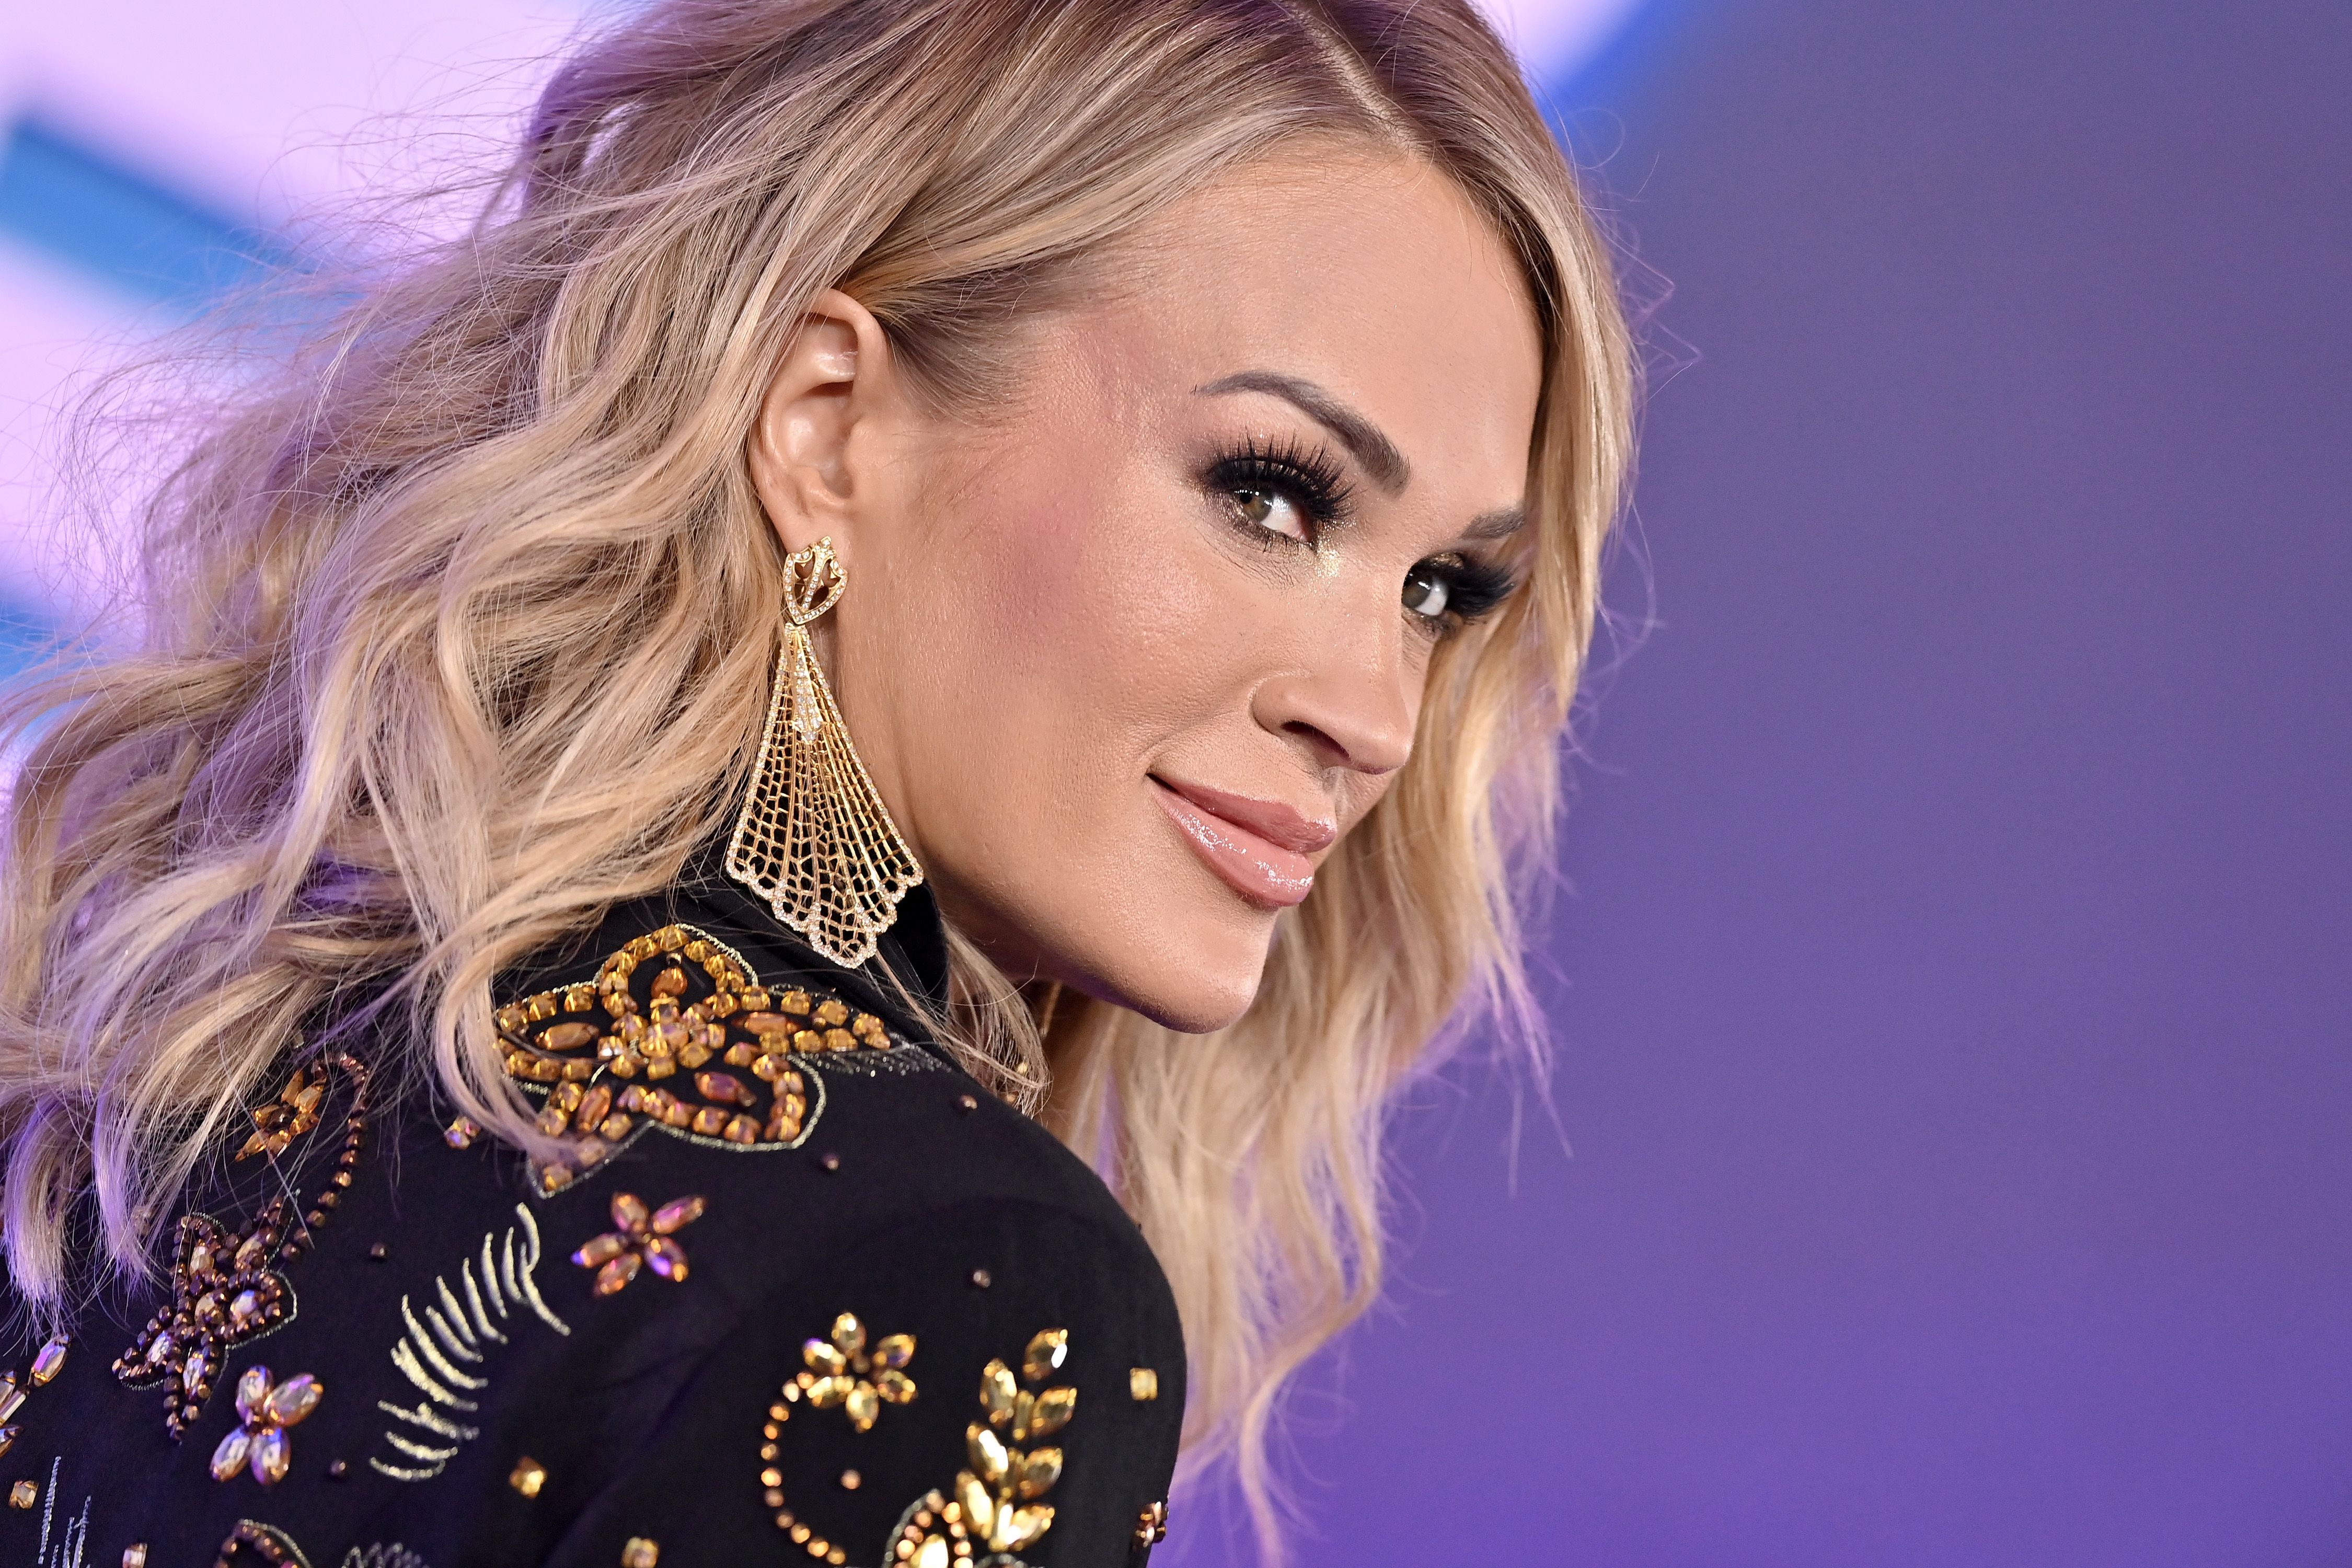 Yes, Carrie Underwood's new concert tour will hit SF